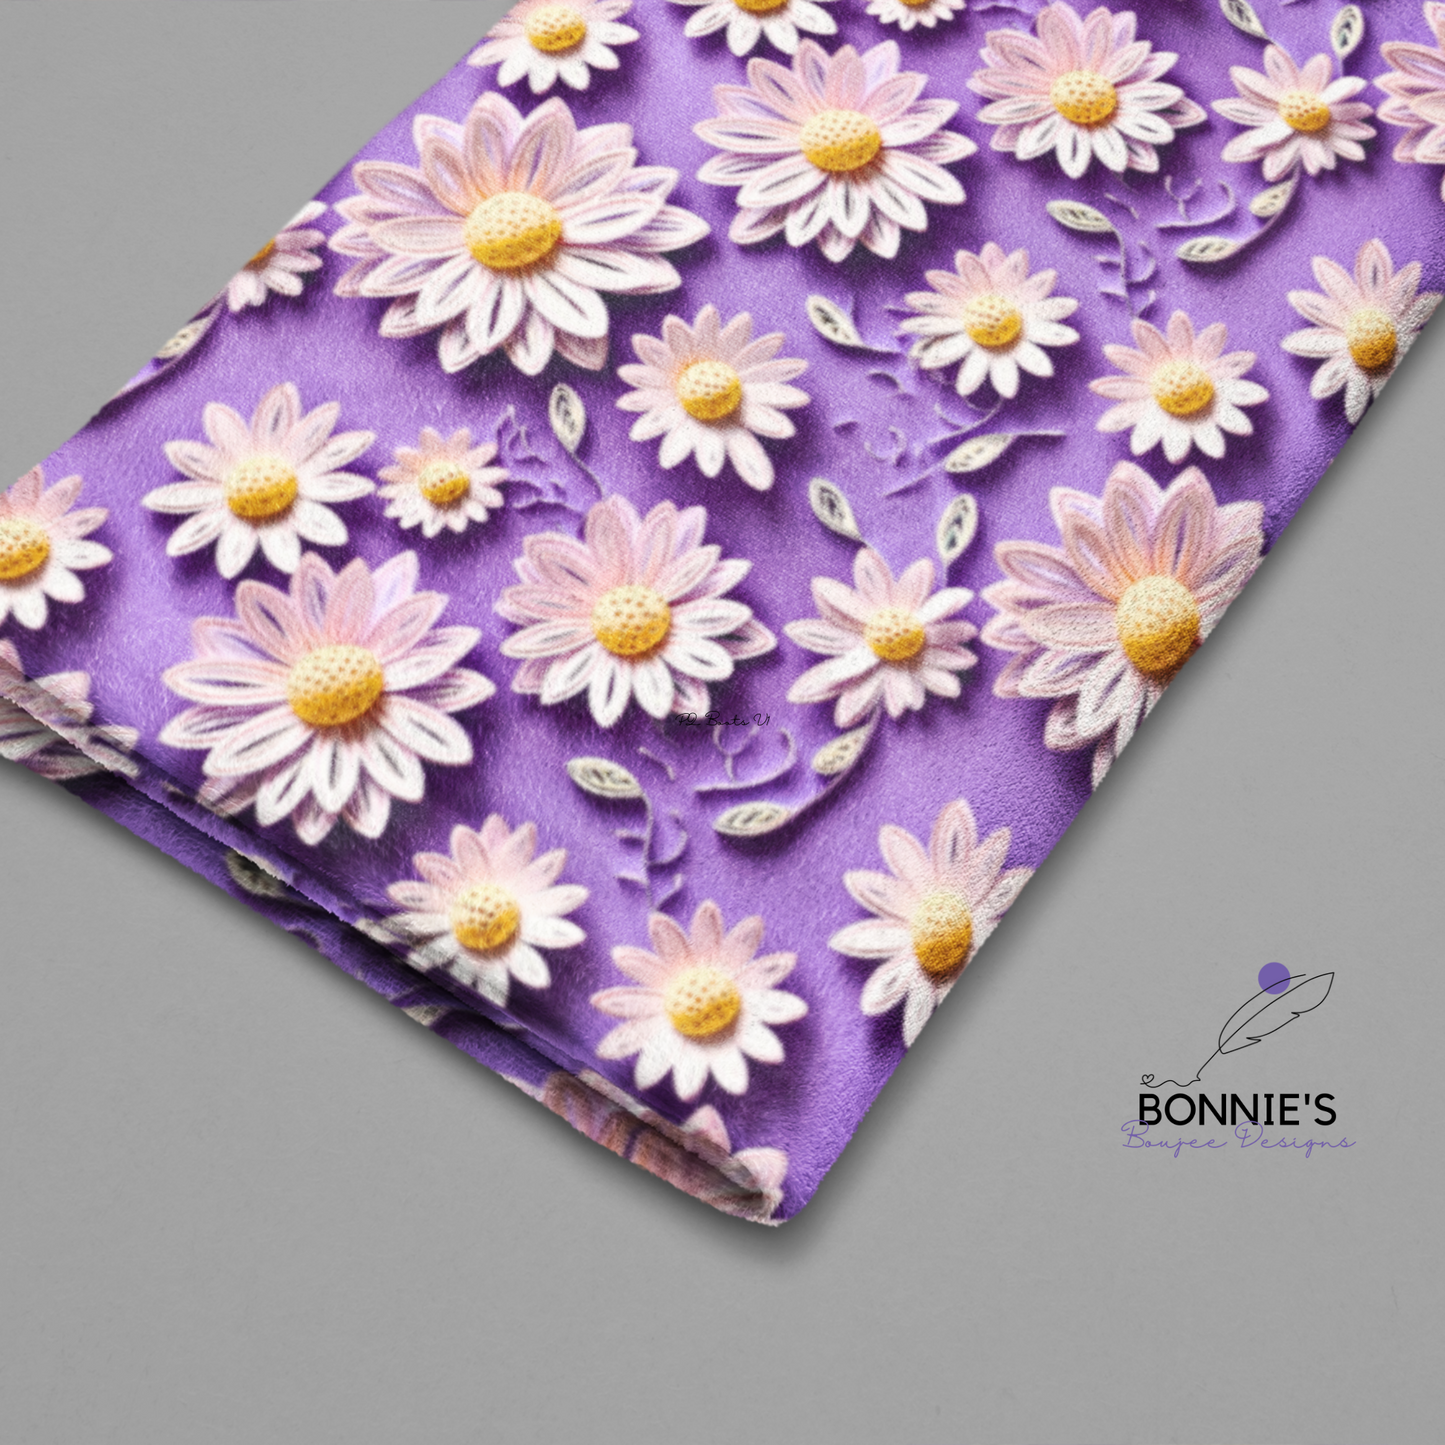 Paper Quilling Daisy's on Purple Background Seamless File